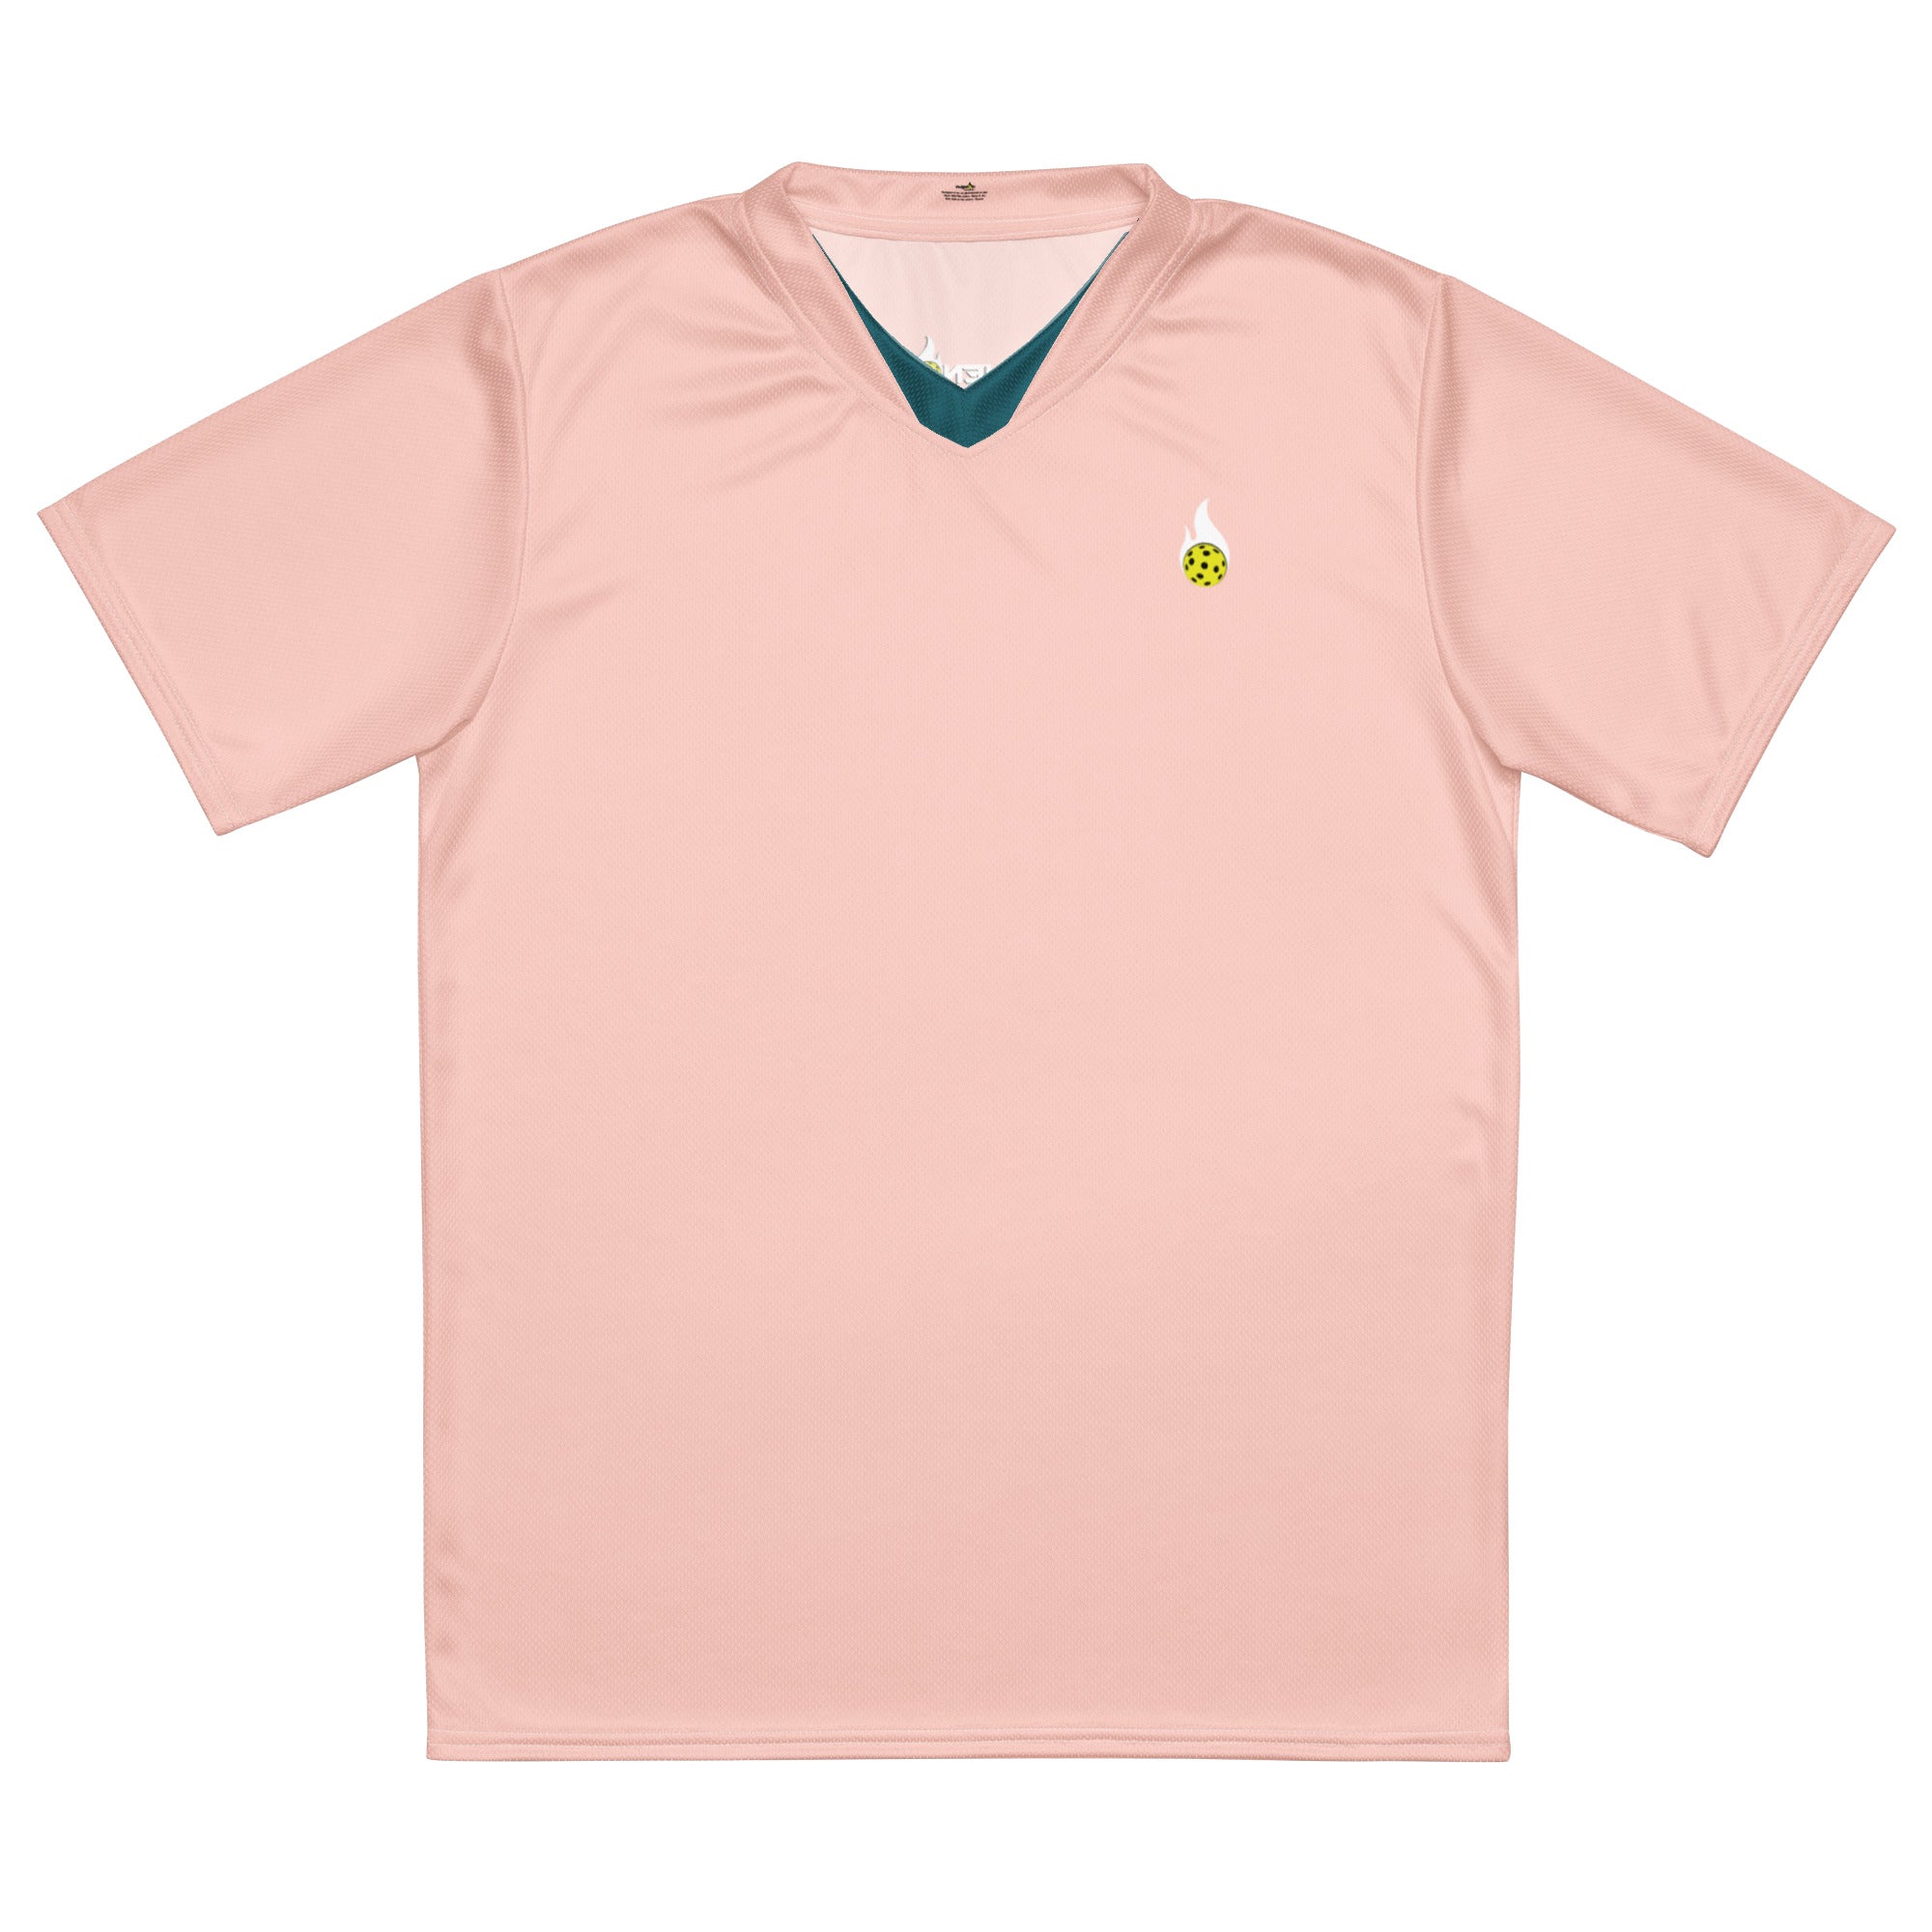 flat placement pink match point pickleball shirt performance apparel athletic top phenom logo front view